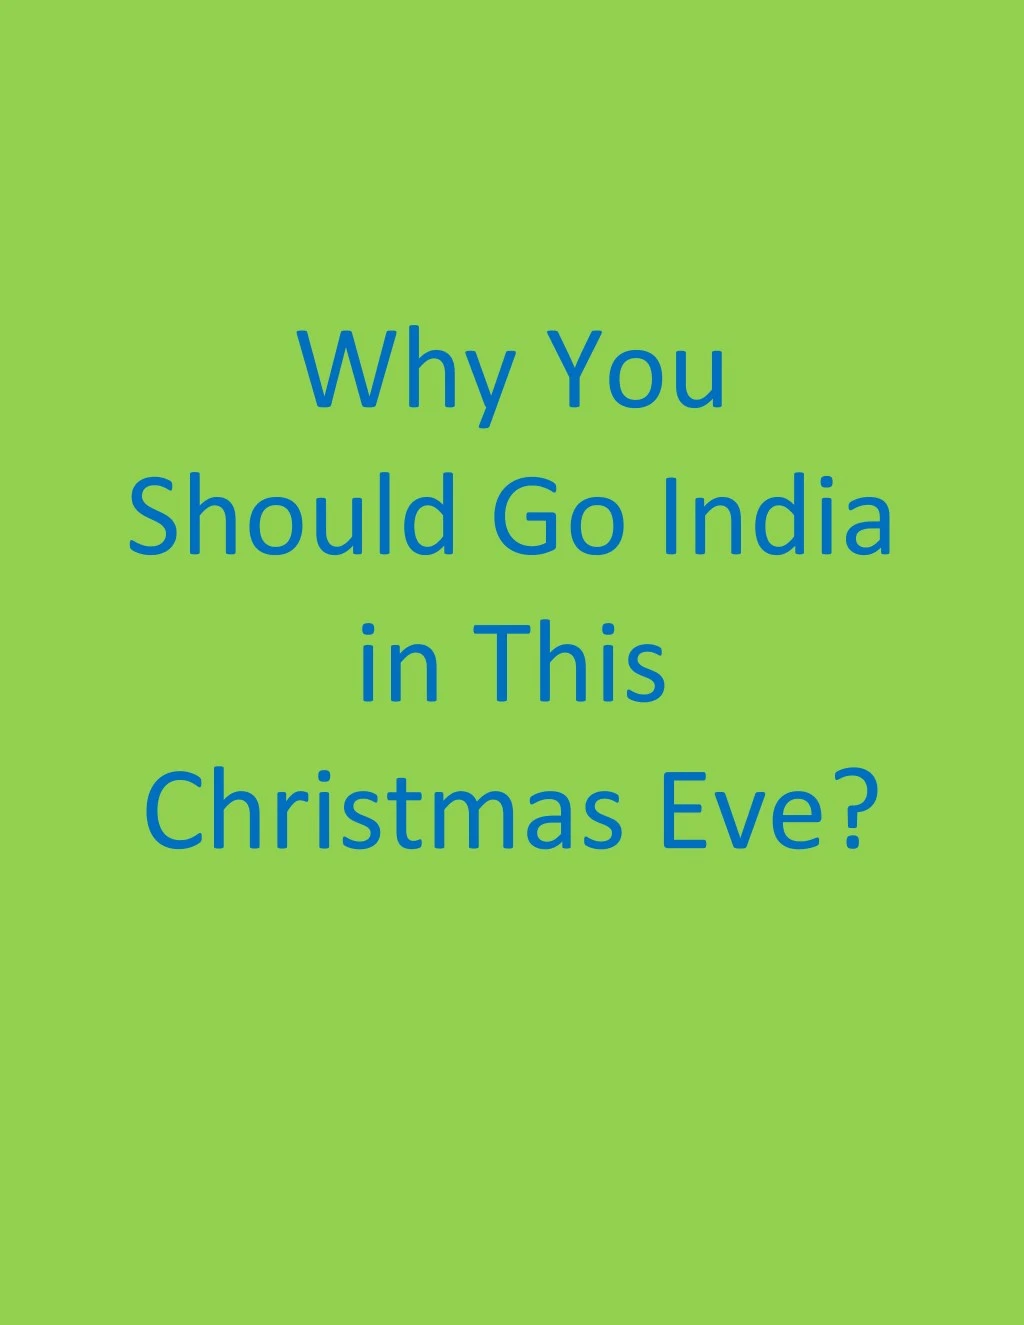 why you should go india in this christmas eve